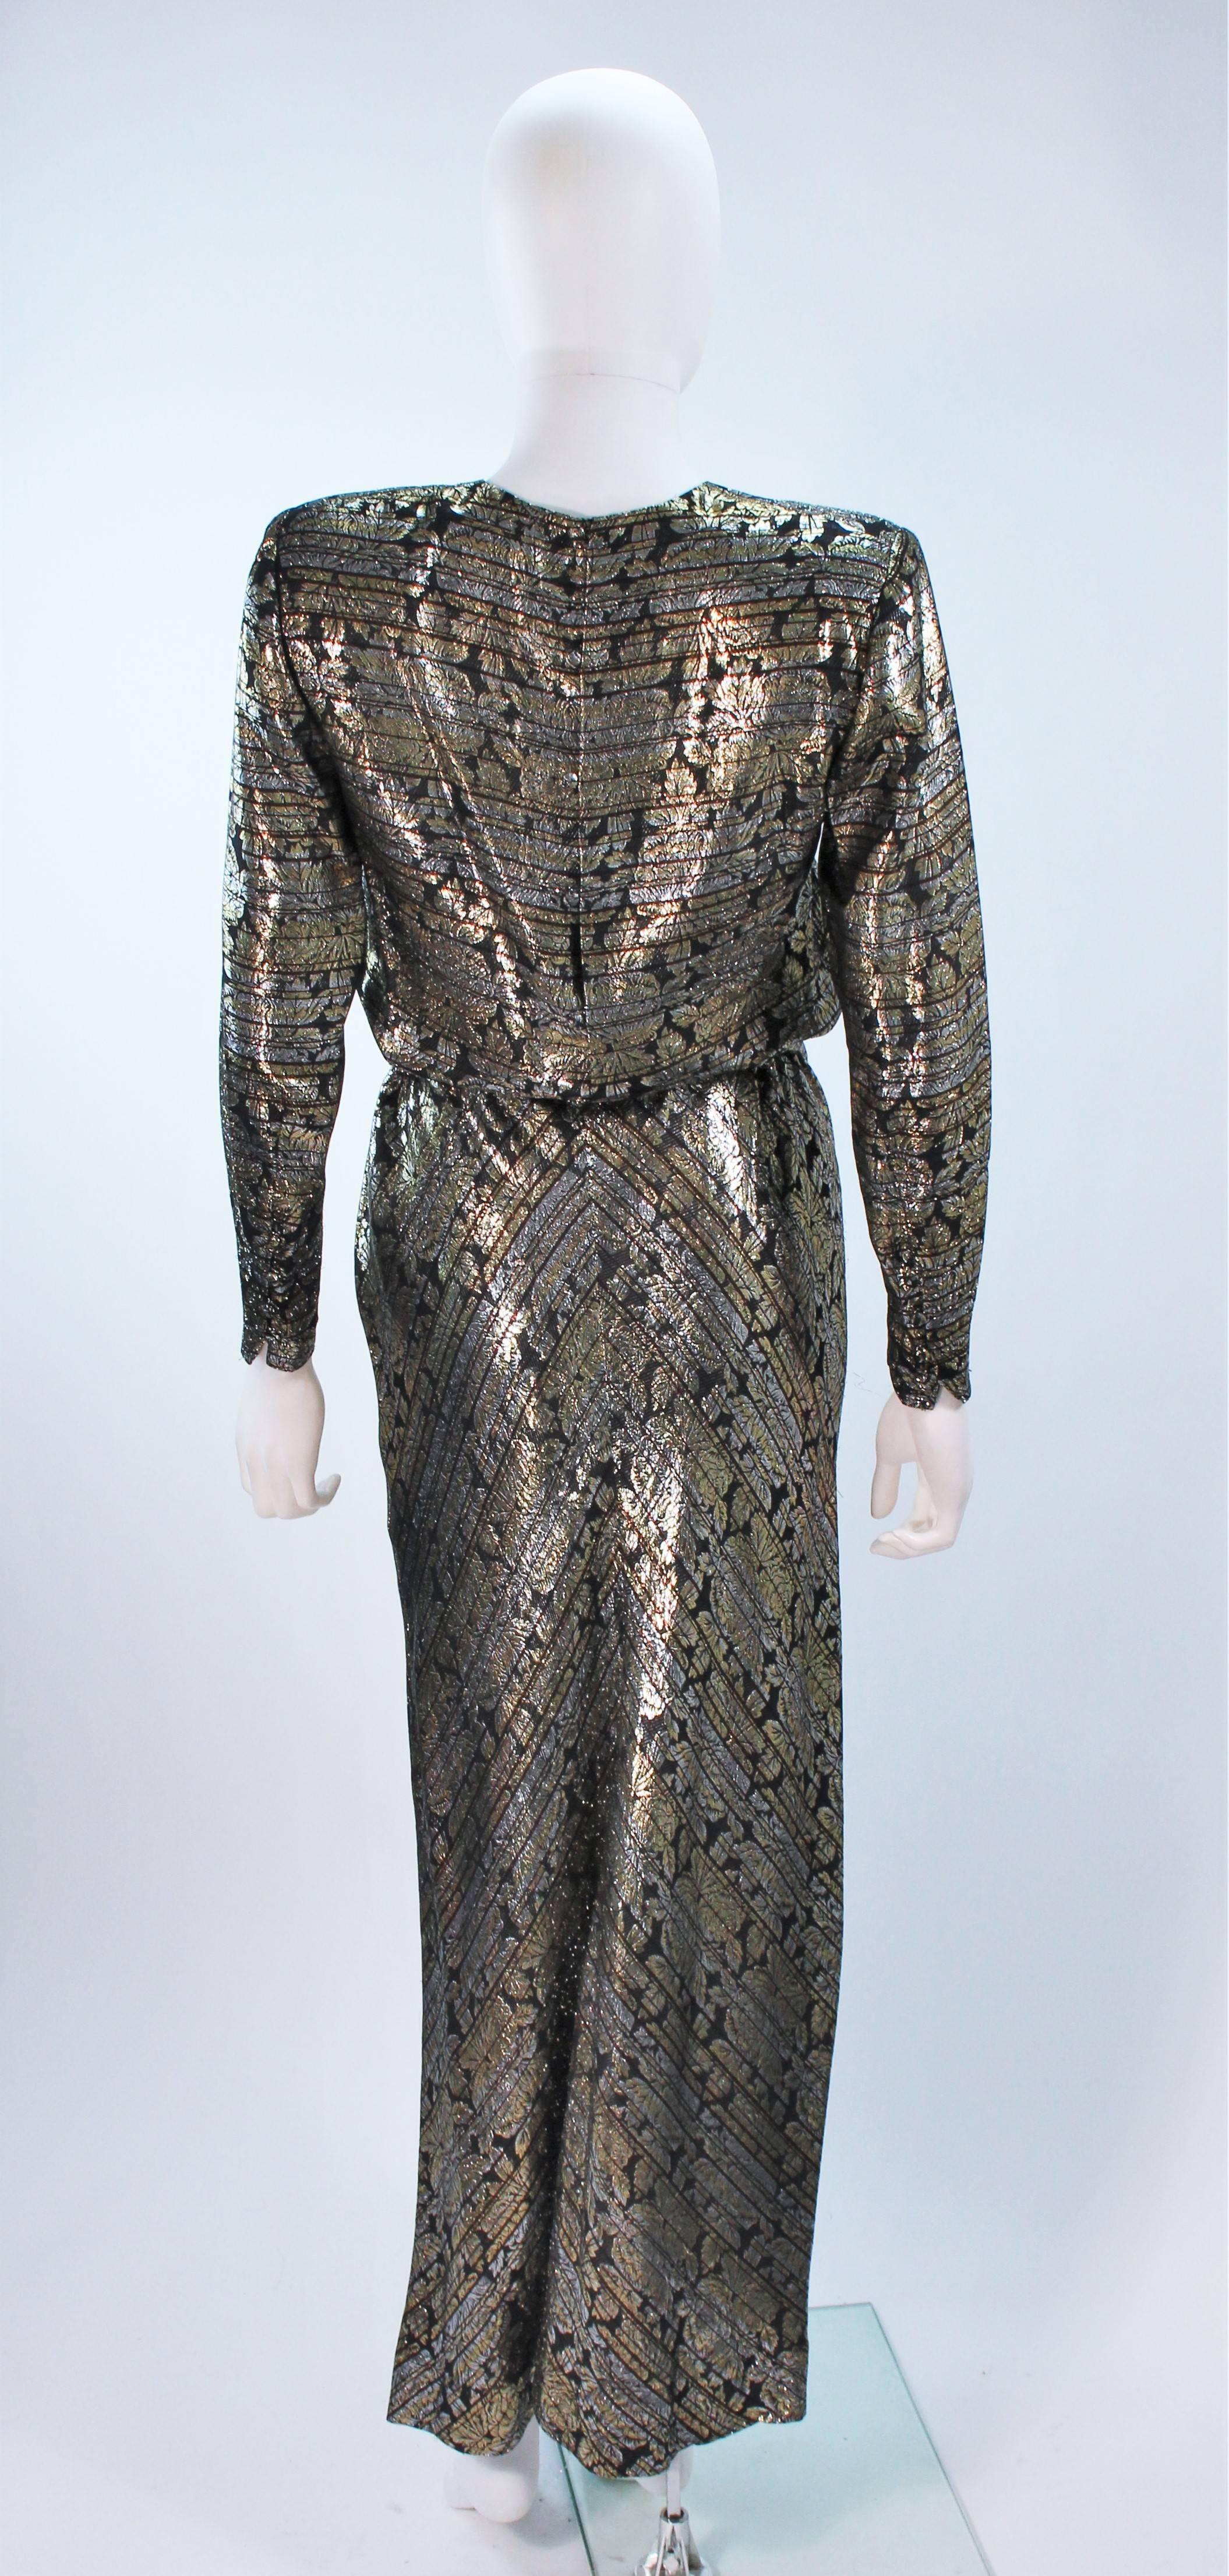 RON LEAL Metallic Lame Bronze Ensemble with Scarf & Wrap Size 6-8 In Excellent Condition For Sale In Los Angeles, CA